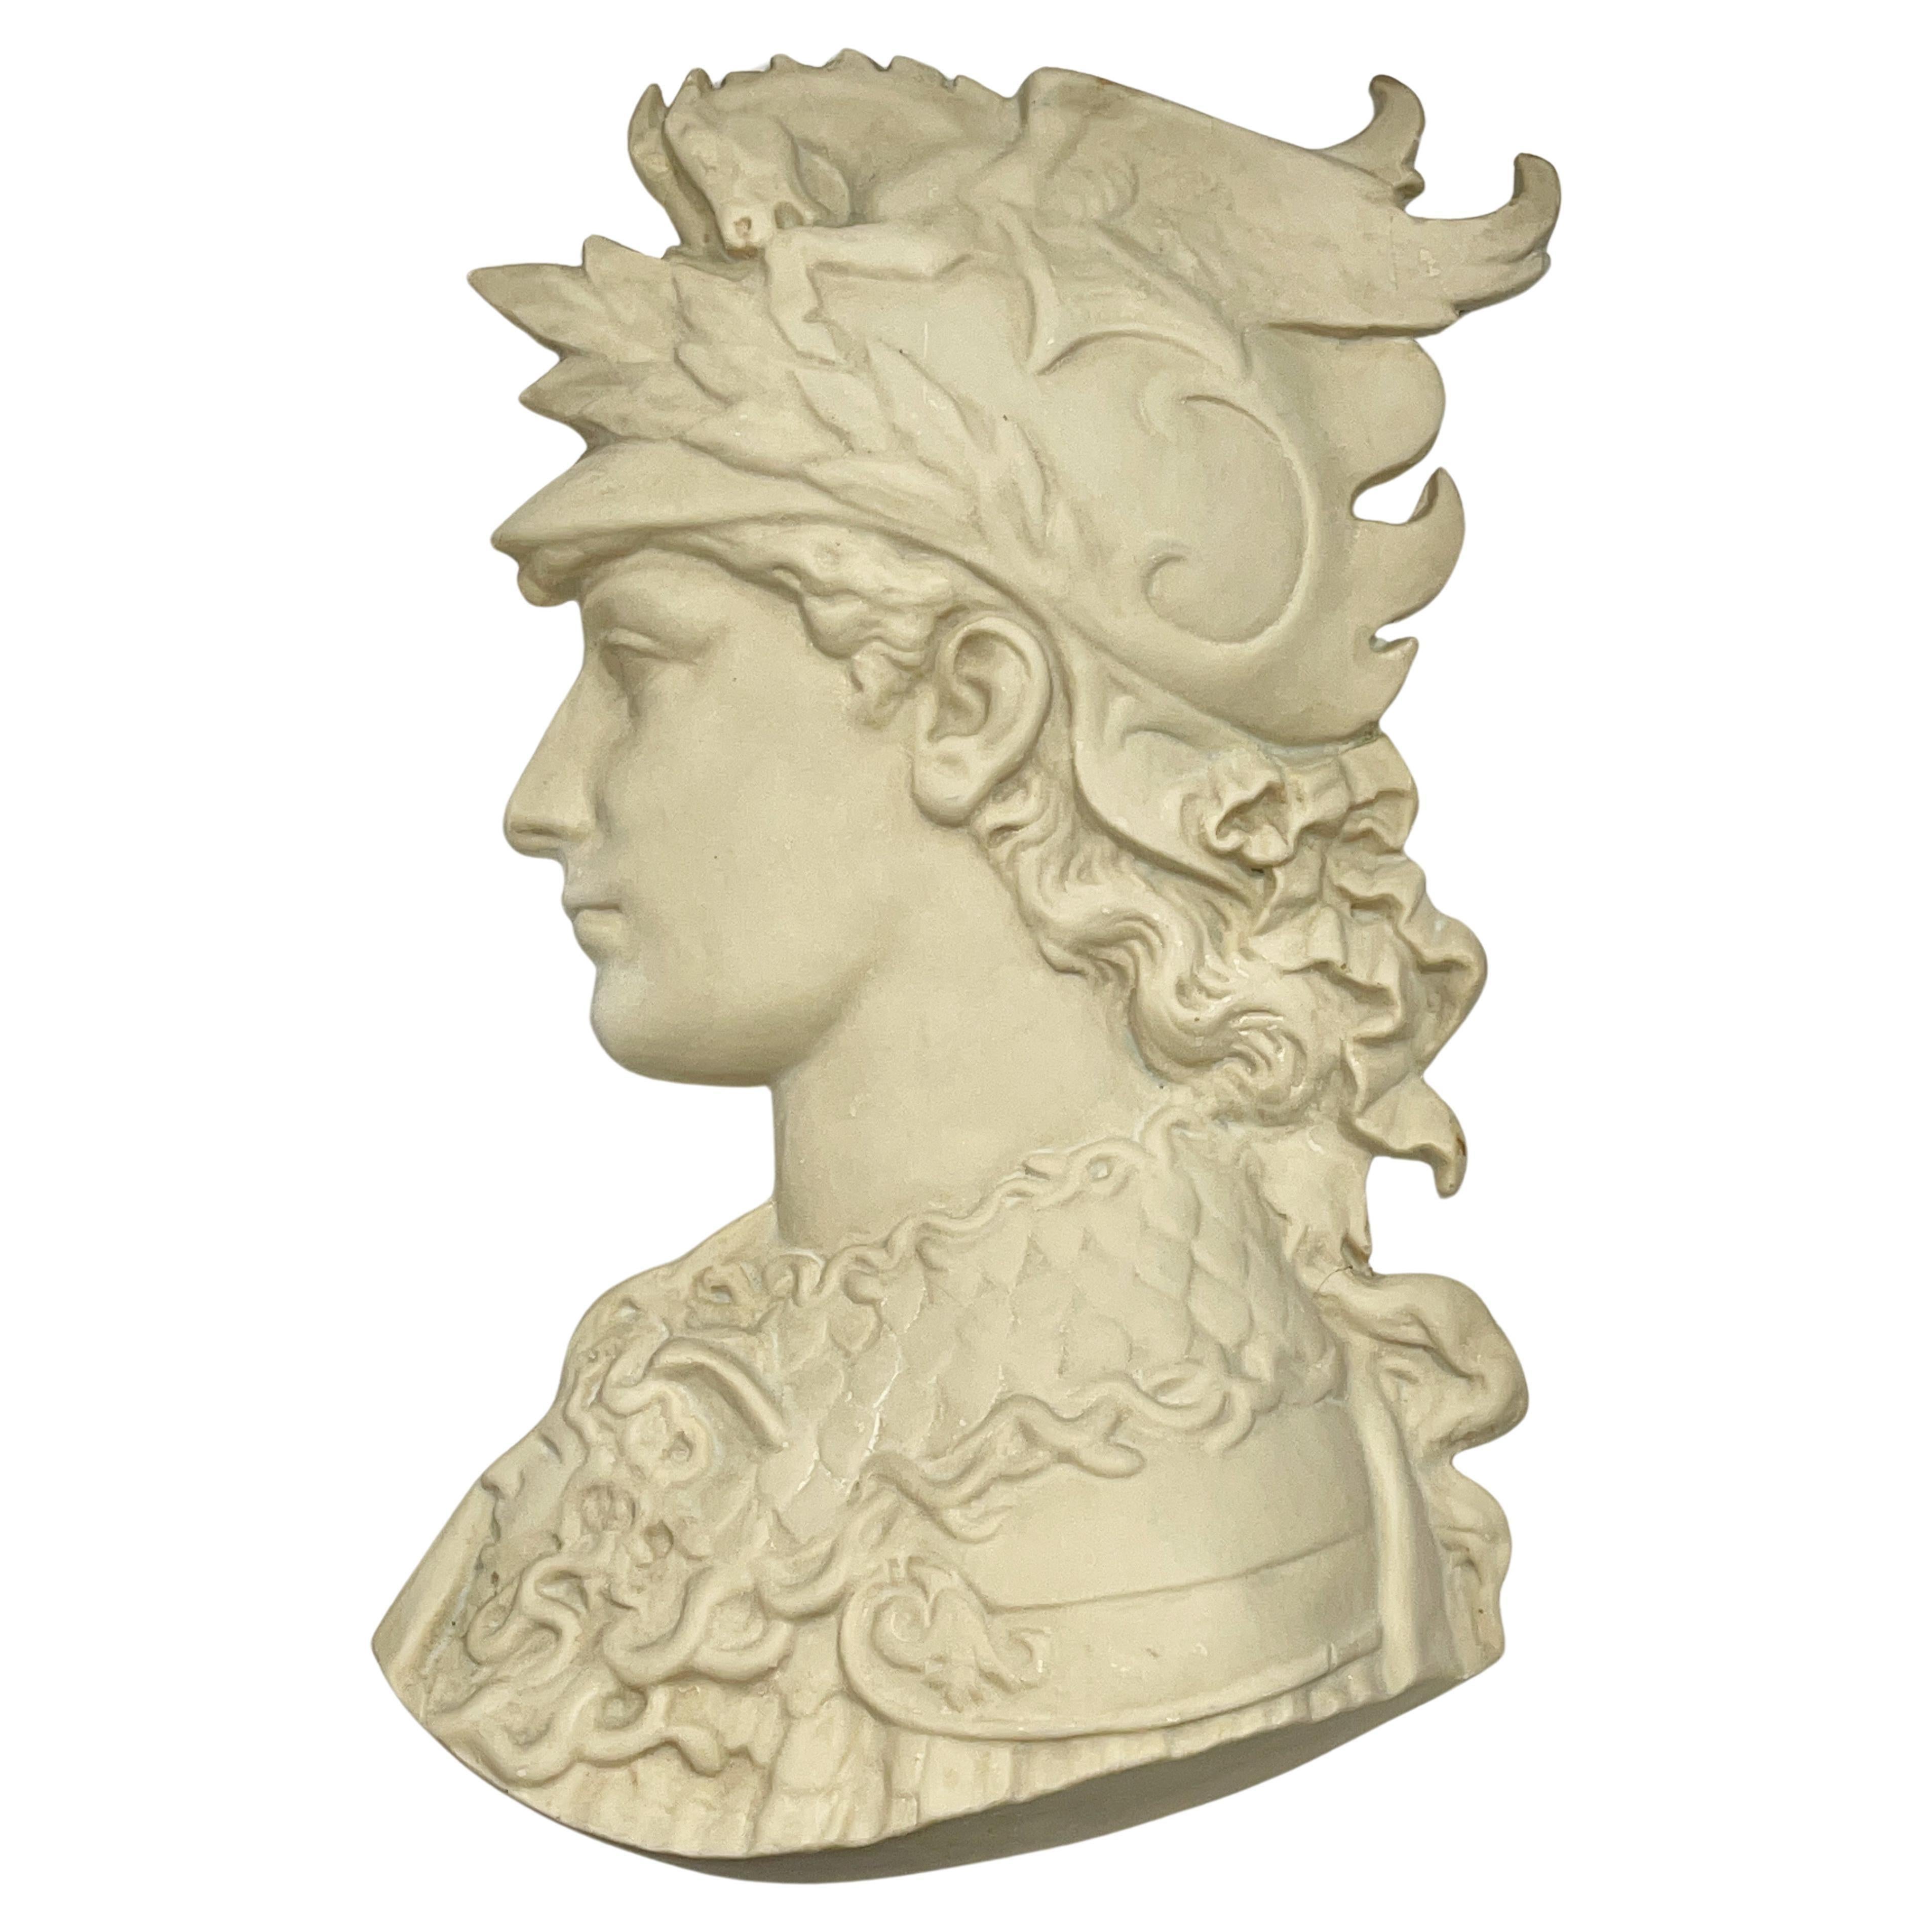 Wall mounted profile in relief of Perseus in cast marble resin and fiberglass by Anthony Redmile (born 1940) of London circa 1990, after a bronze bas relief sculpture by Edmond Louis Charles Tassel (active 1870-1900).
Anthony Redmile (aka J. Antony